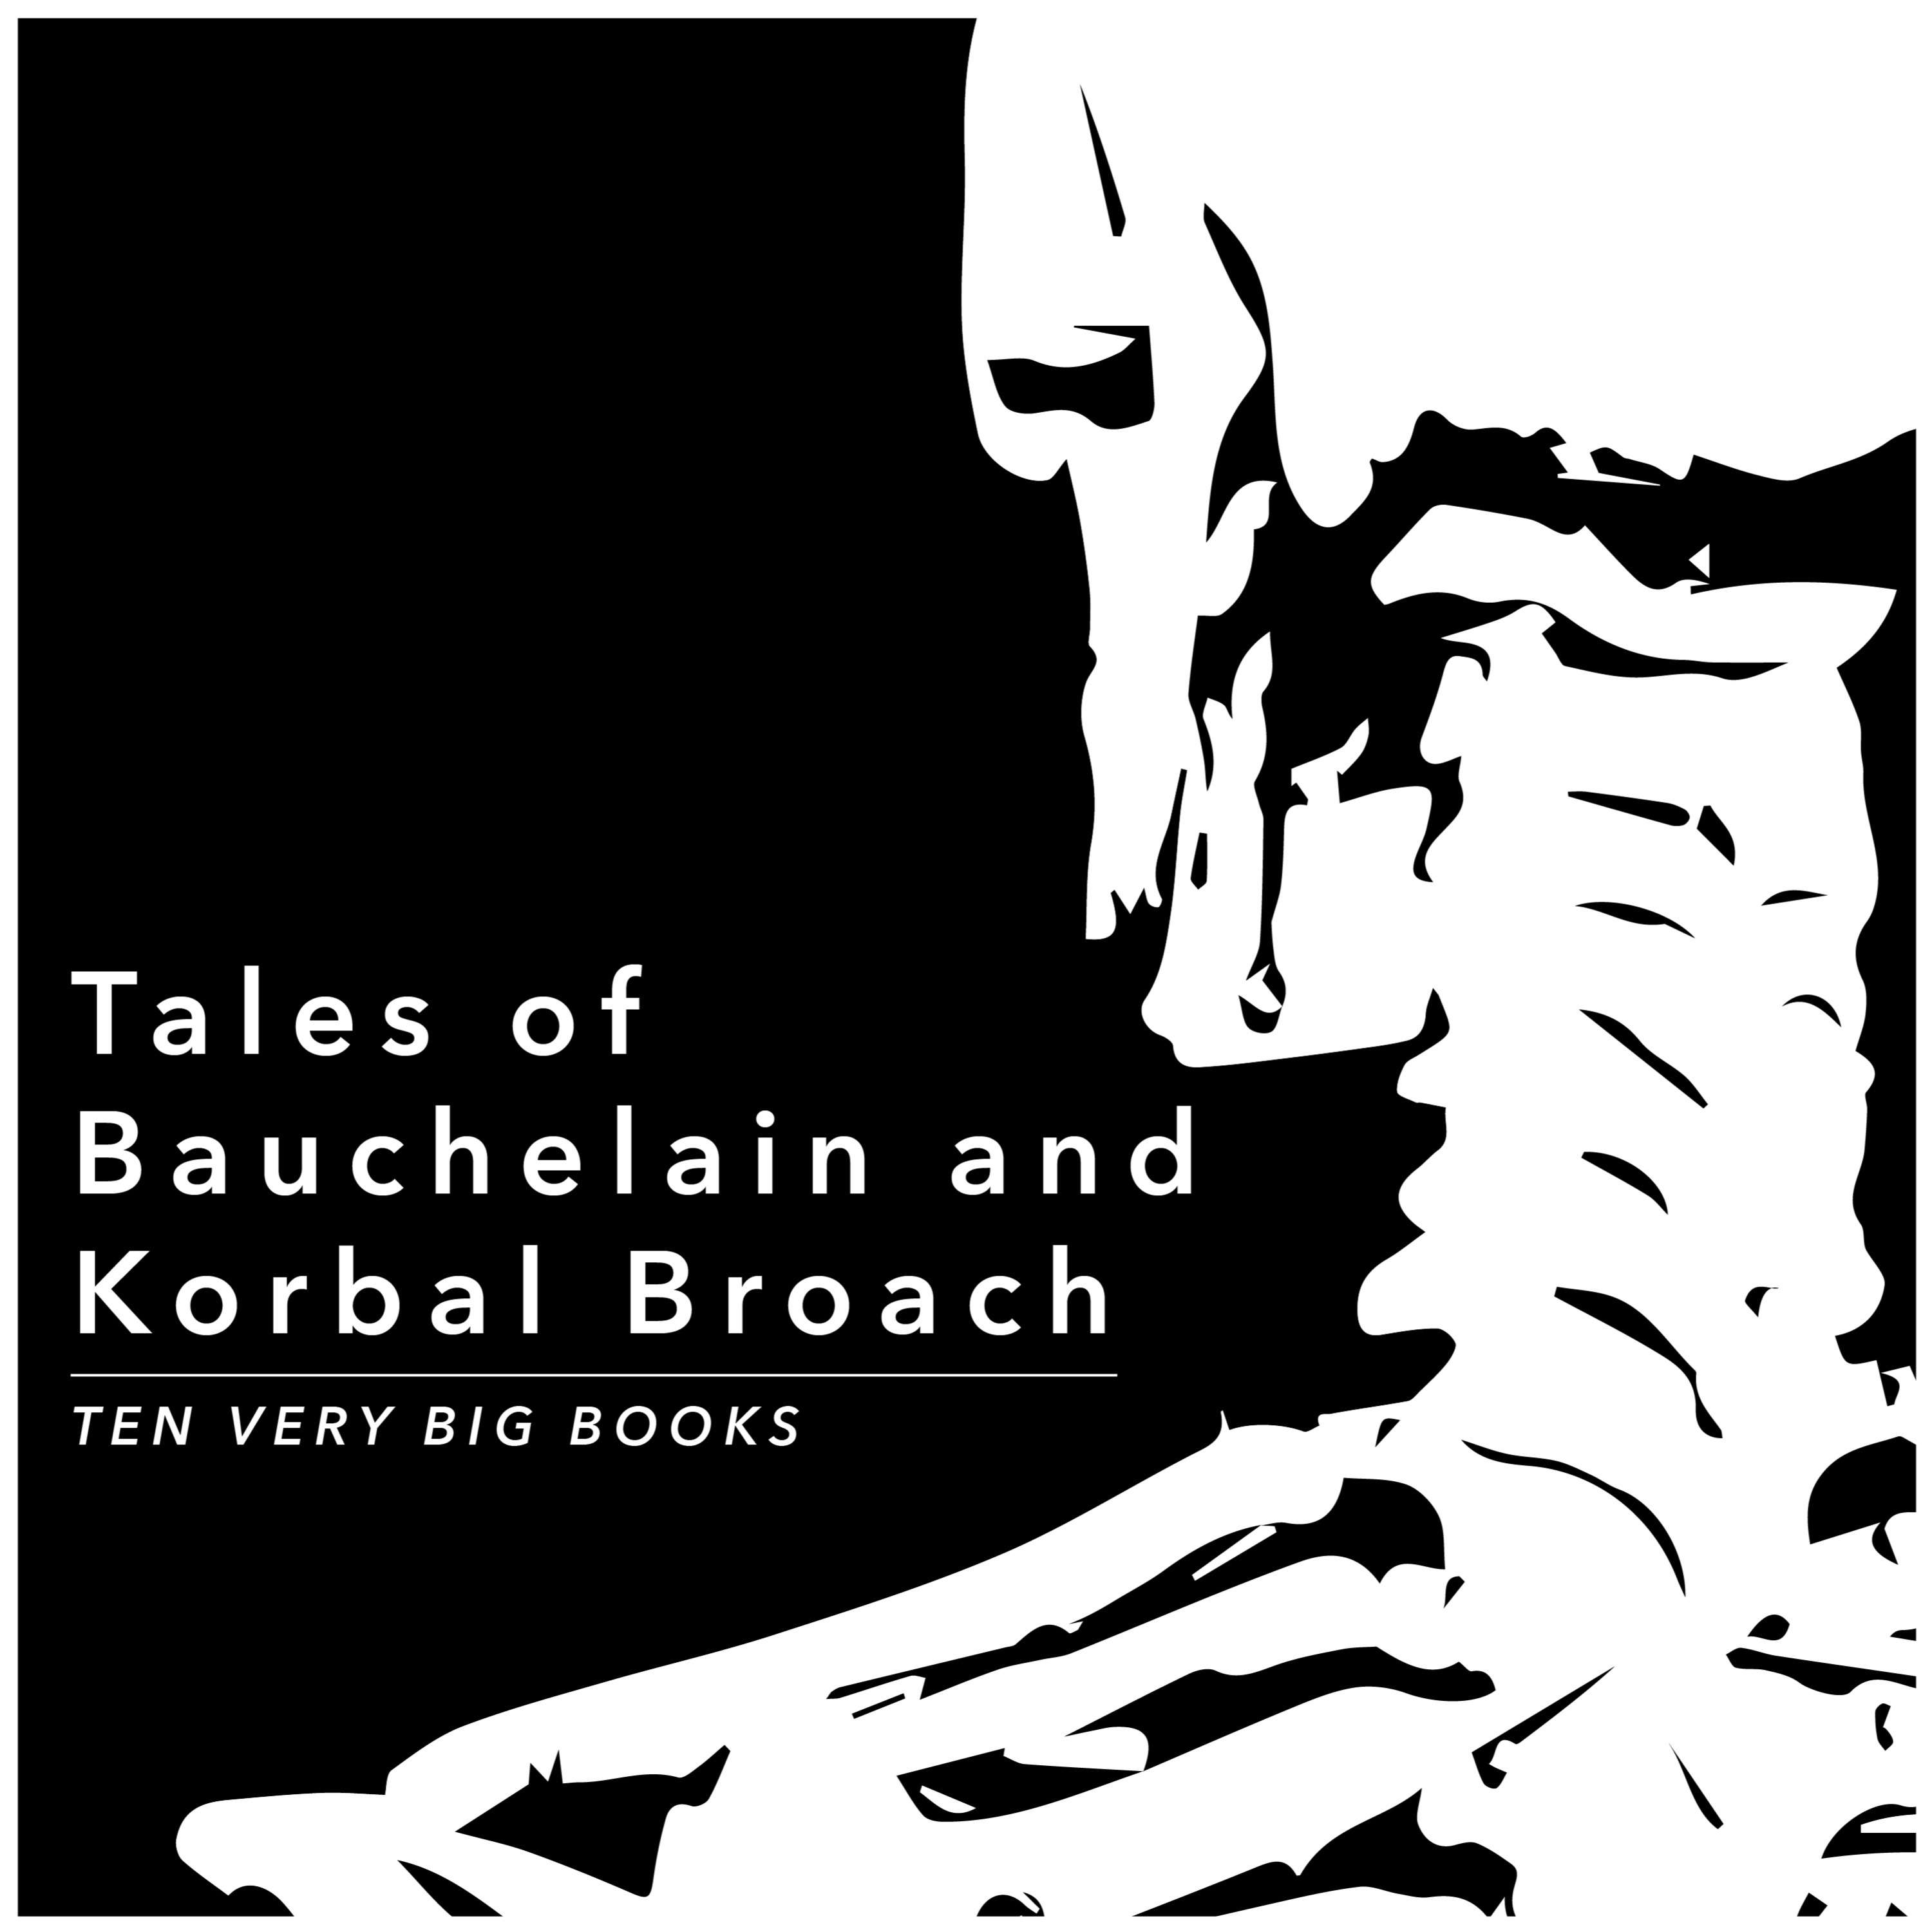 The First Collected Tales of Bauchelain & Korbal Broach